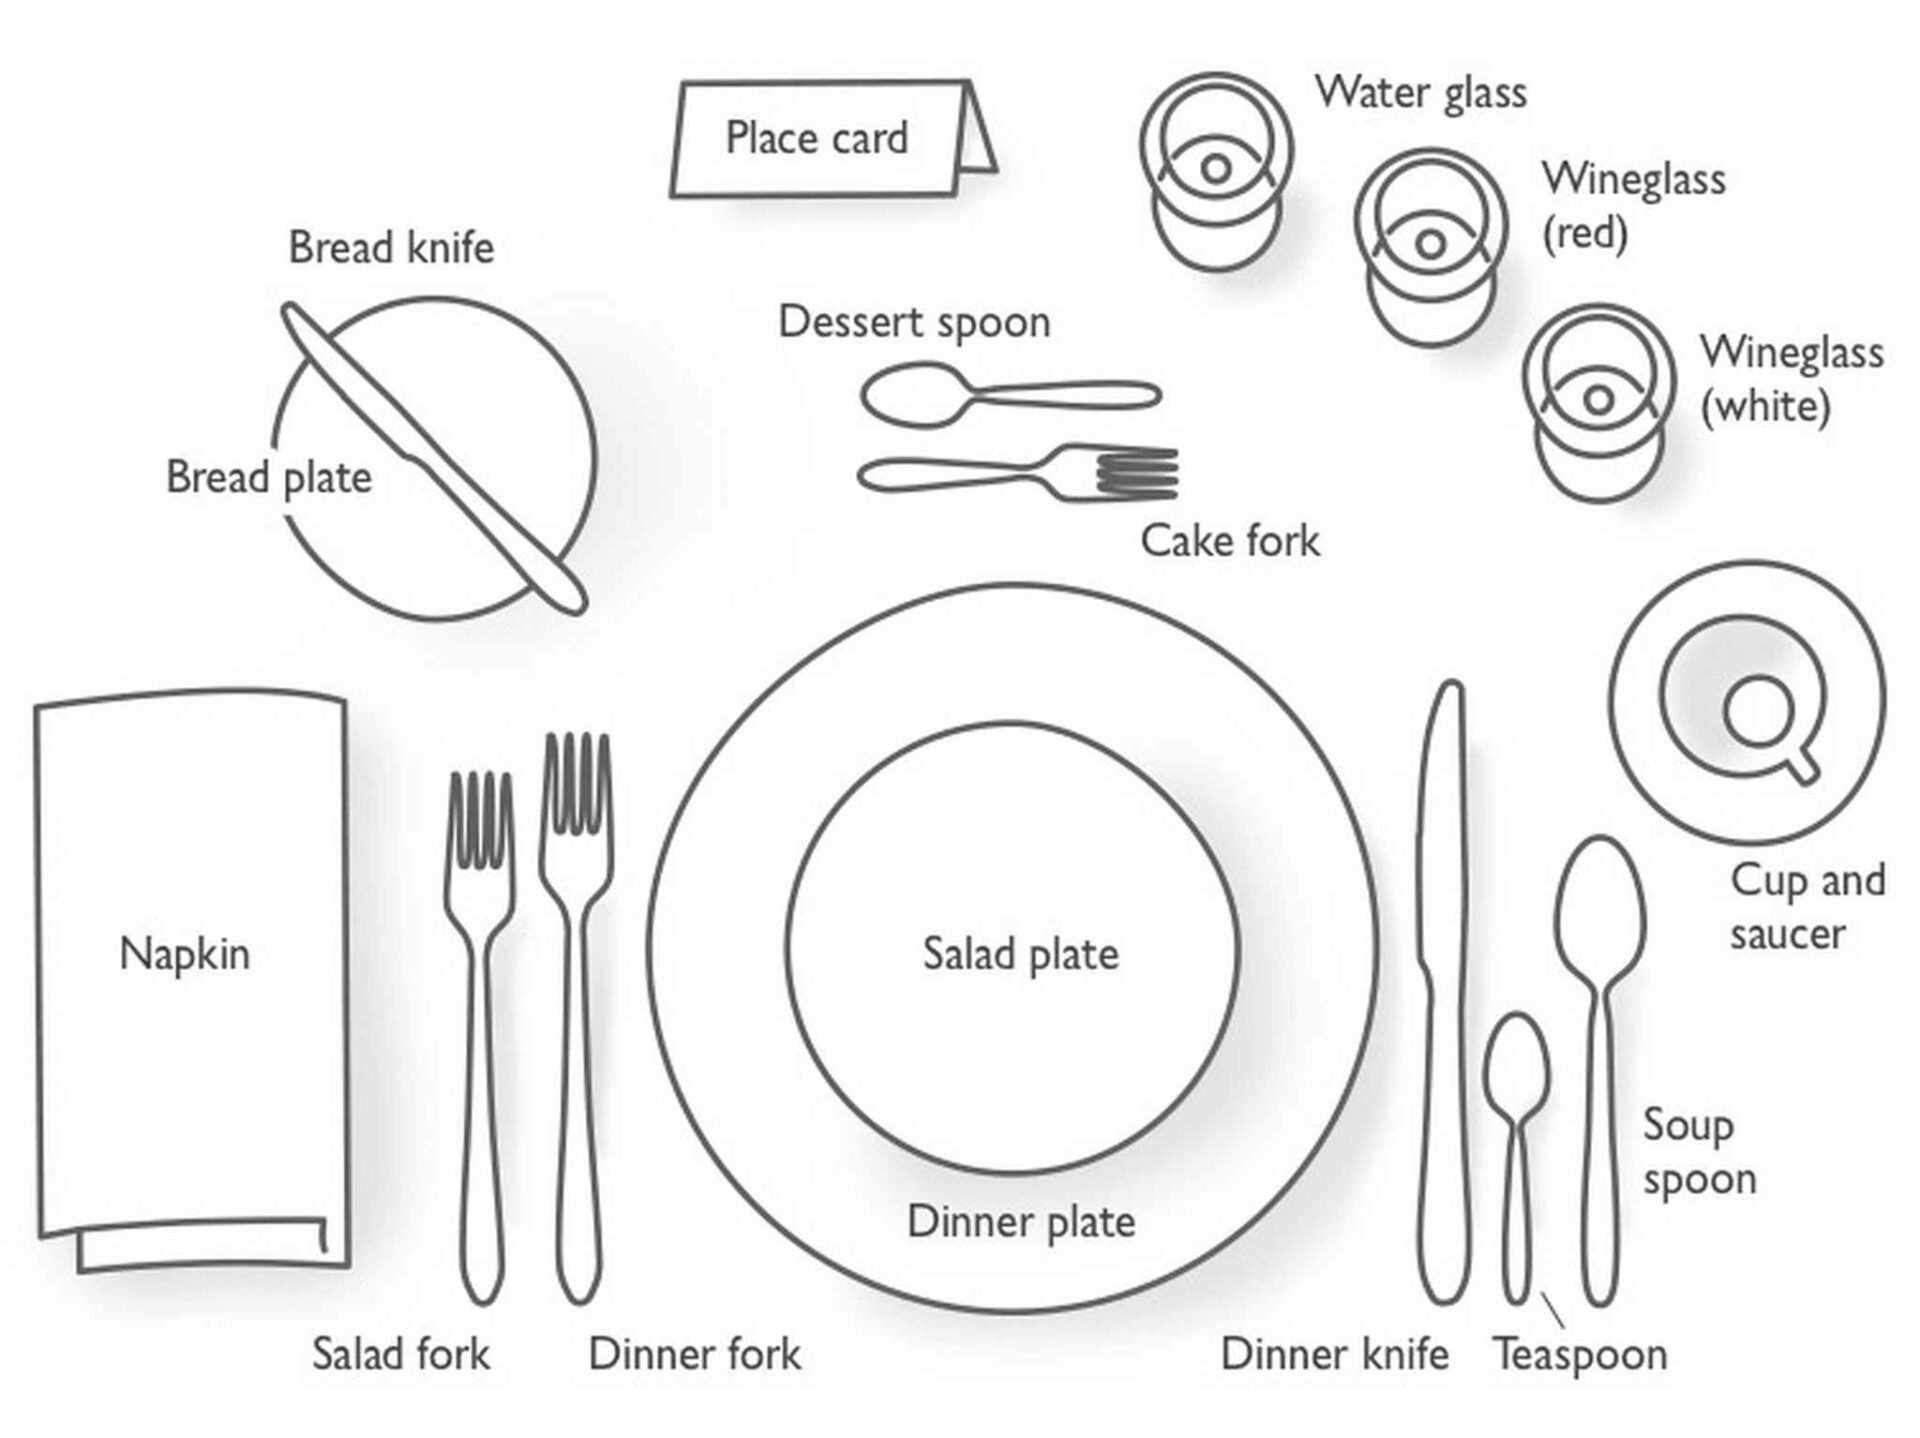 Dinner table setting tips for an elevated wine & dine experience ...